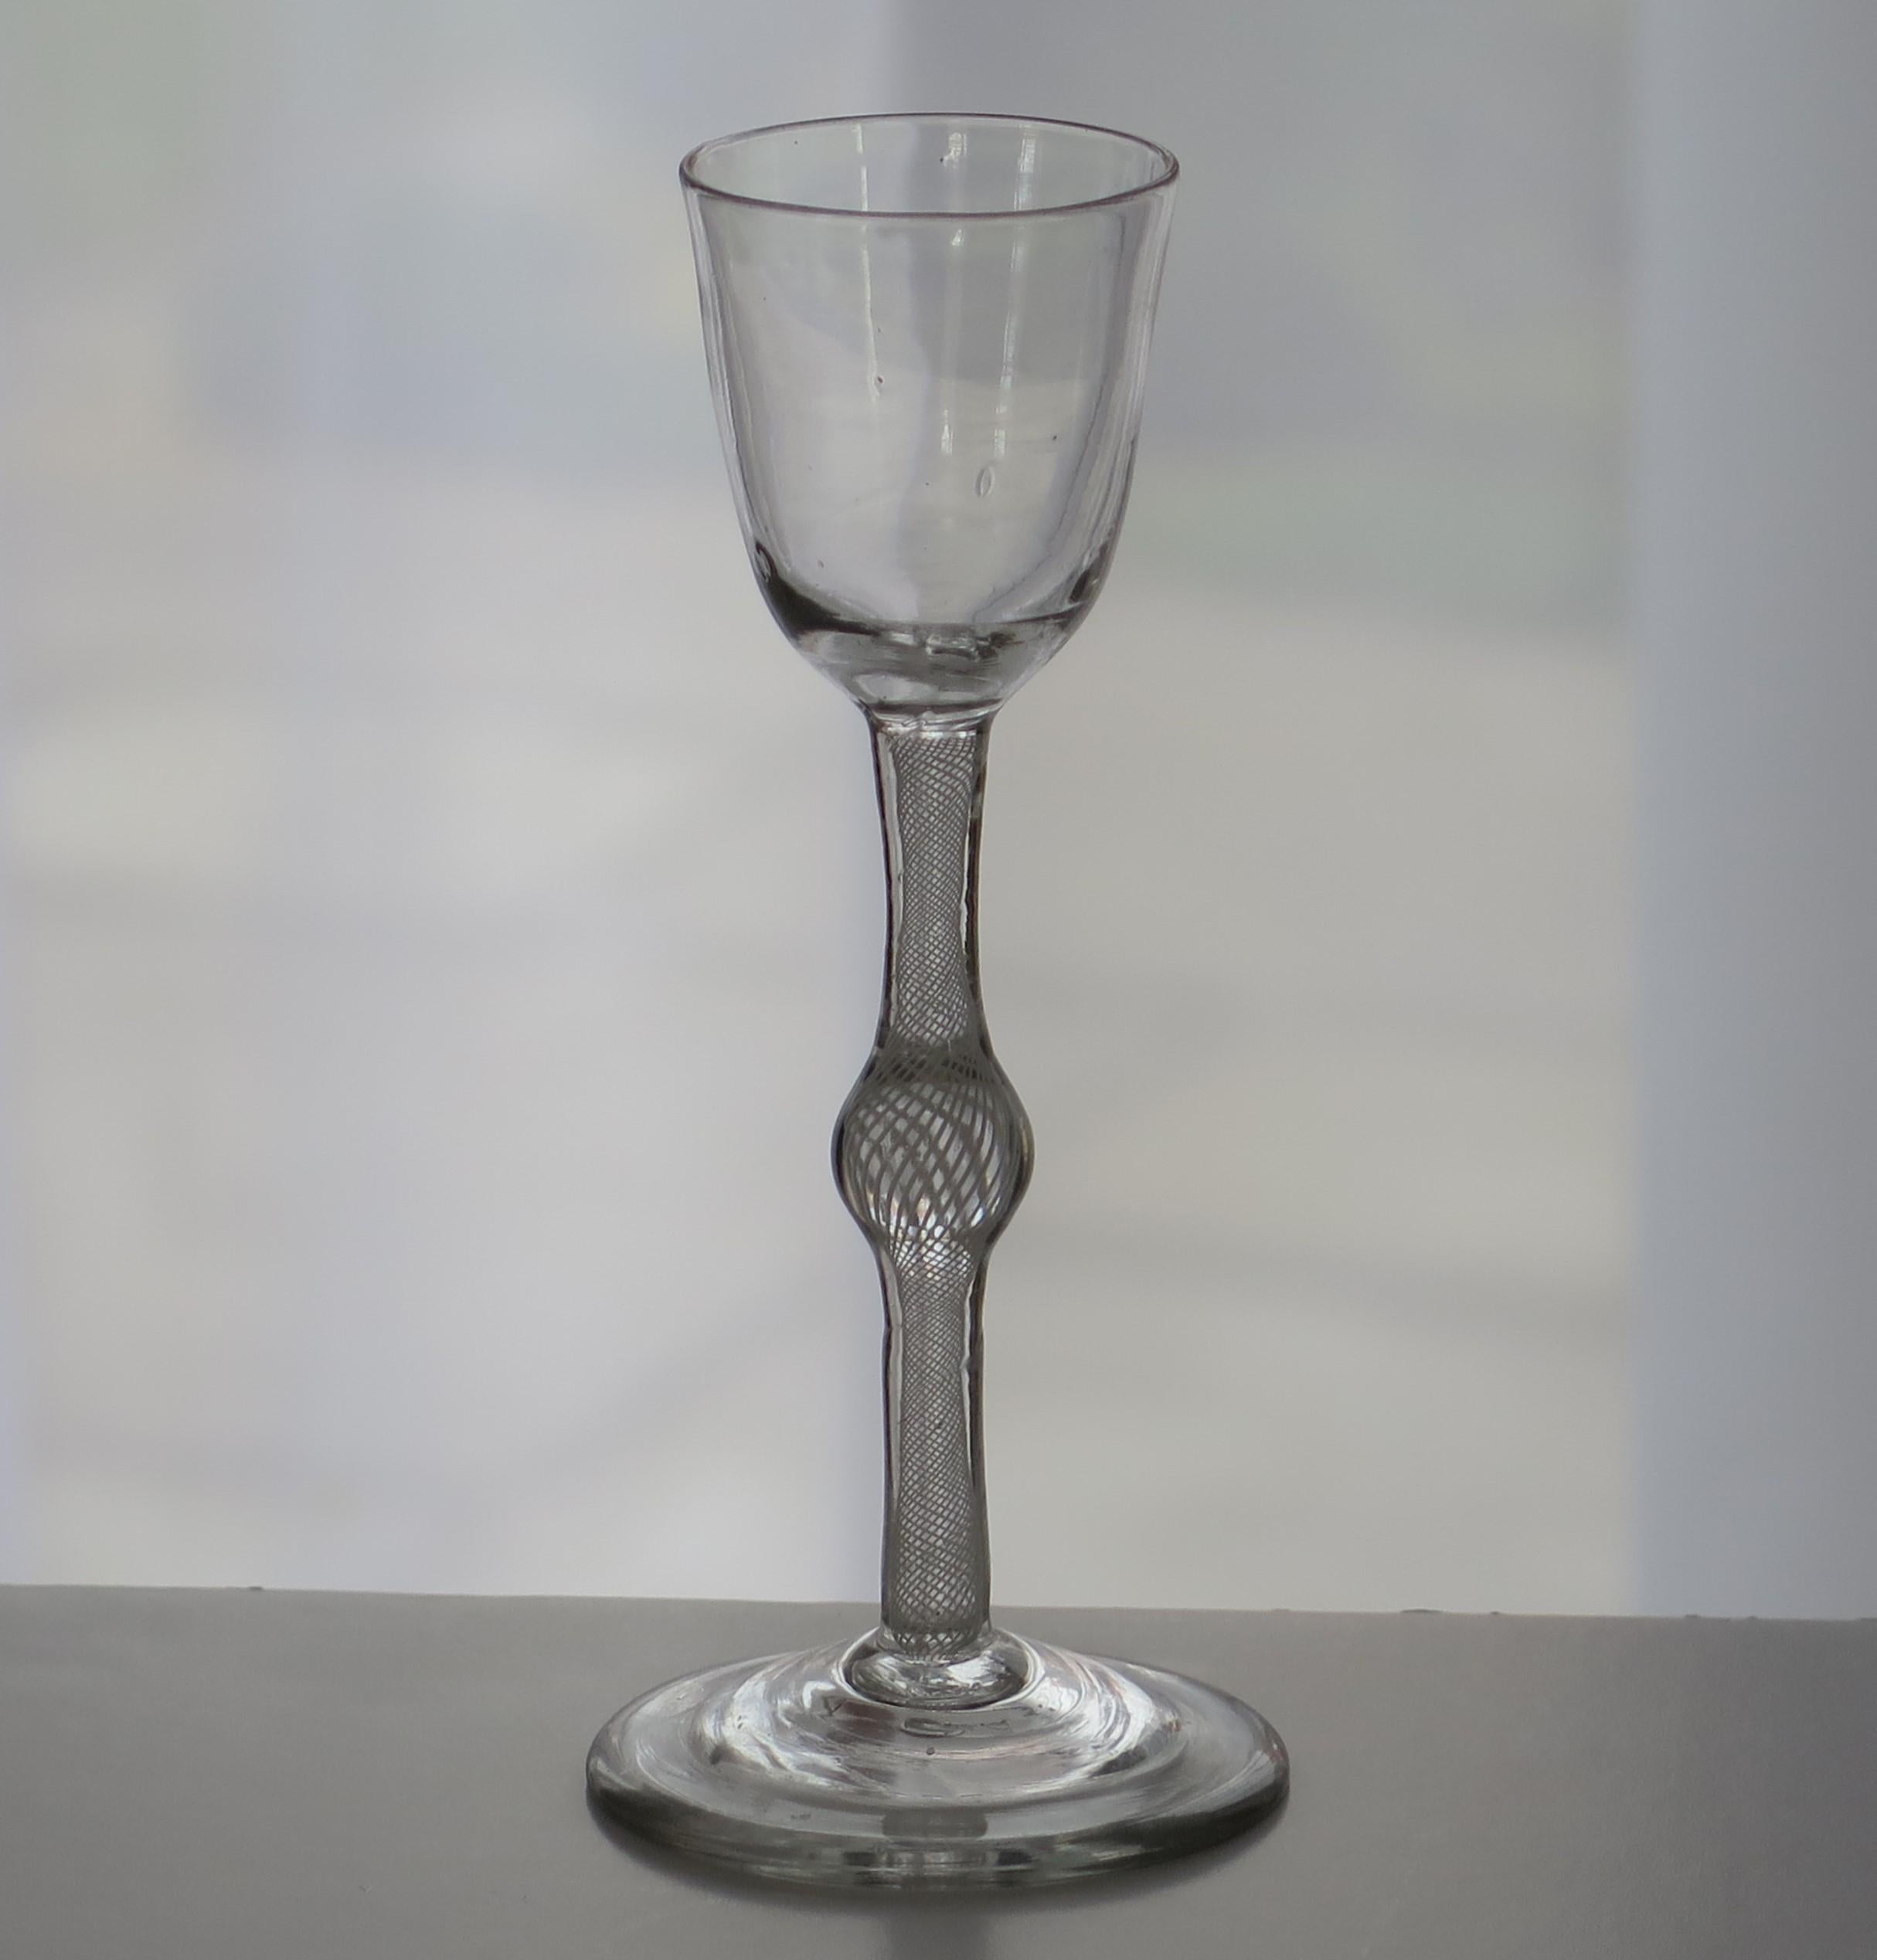 This is a good, tall hand-blown, English, mid-Georgian, cordial drinking glass with a single series opaque twist (SSOT) or Cotton twist stem, dating from the middle of the 18th century, circa 1765.

These glasses are very collectable. 

It is made